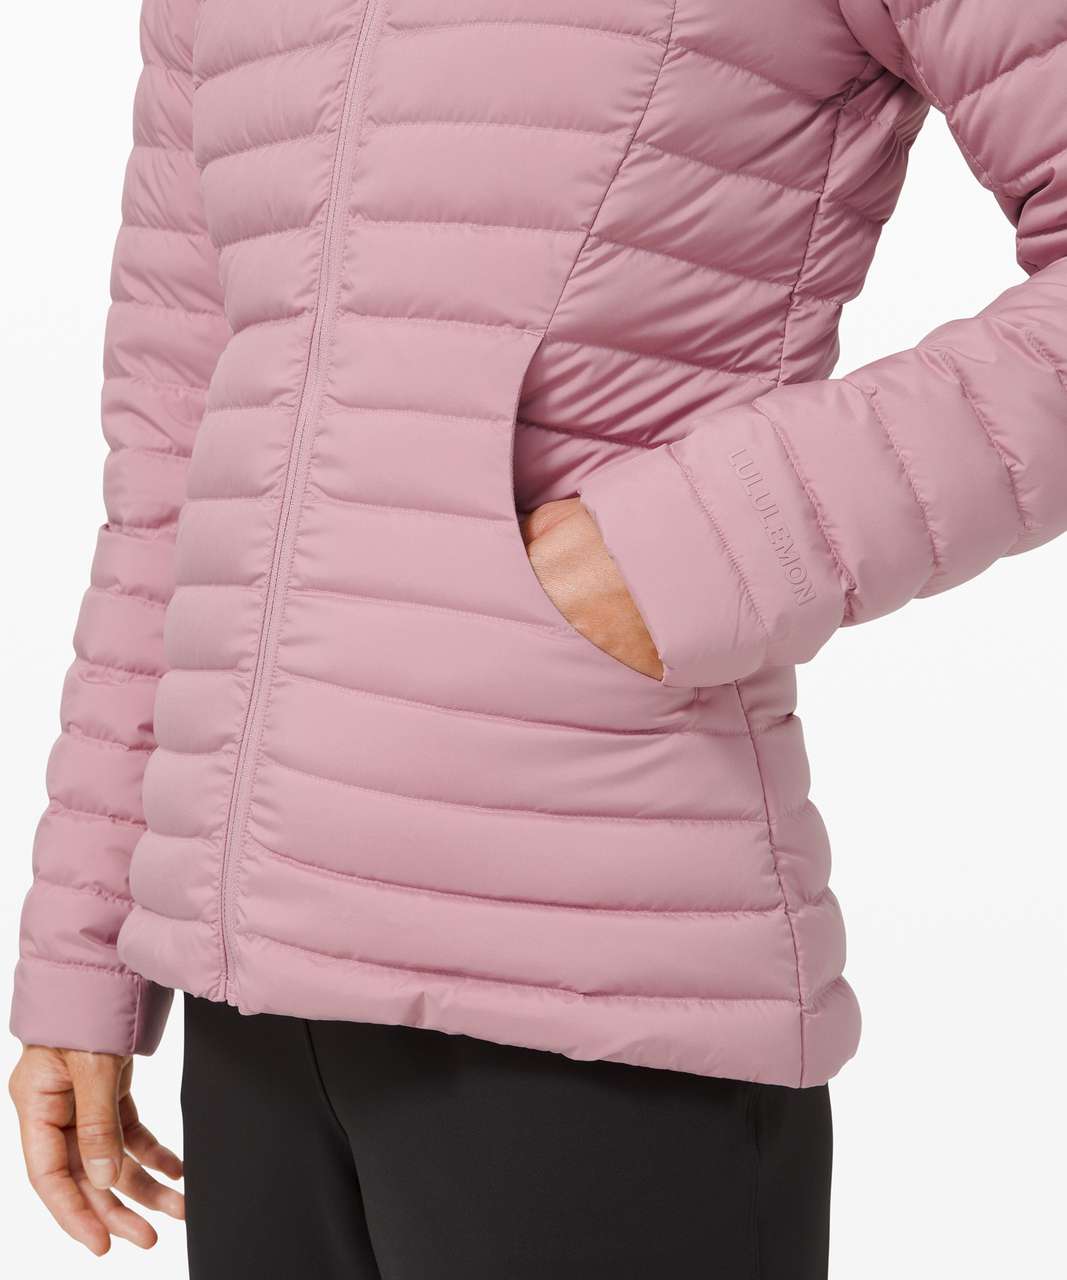 Lululemon Pack It Down Jacket - Pink Taupe (First Release)